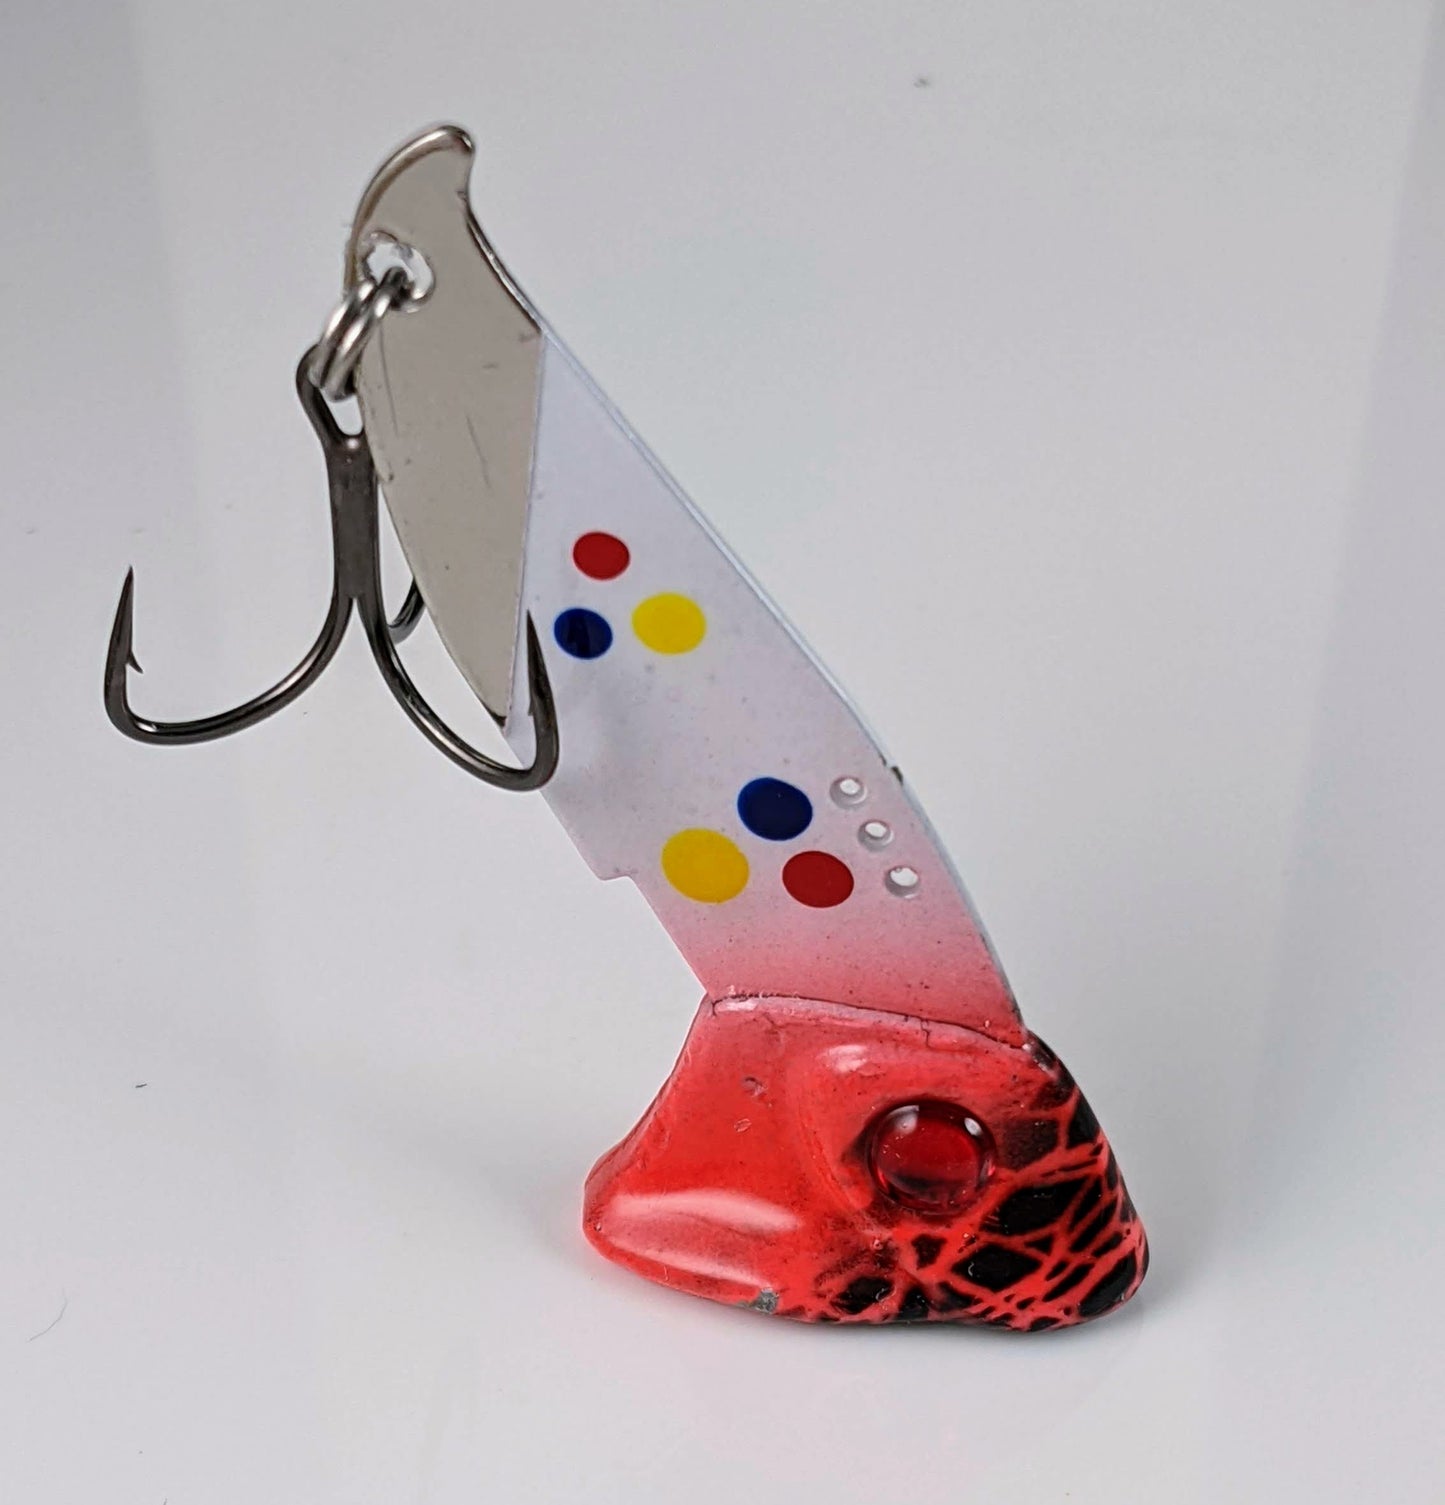 Vertical Jigs and Lures - Vertical Minnow Blade Bait - Wonder - Vertical Jigs and Lures Custom Vertical Minnow